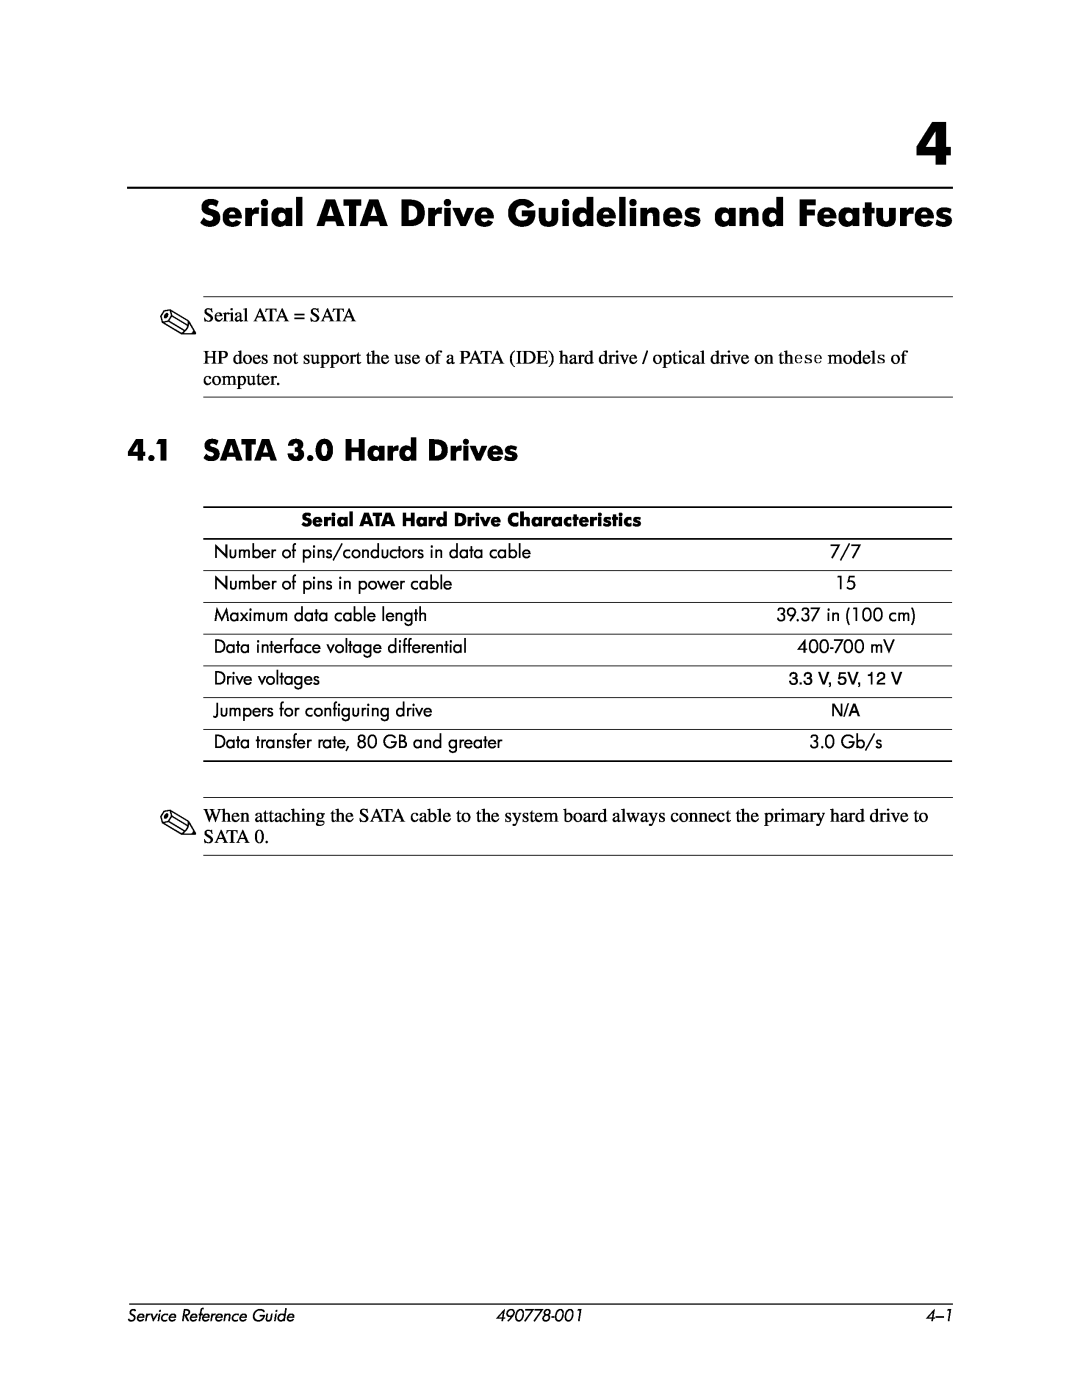 HP dx2310 manual Serial ATA Drive Guidelines and Features, SATA 3.0 Hard Drives 